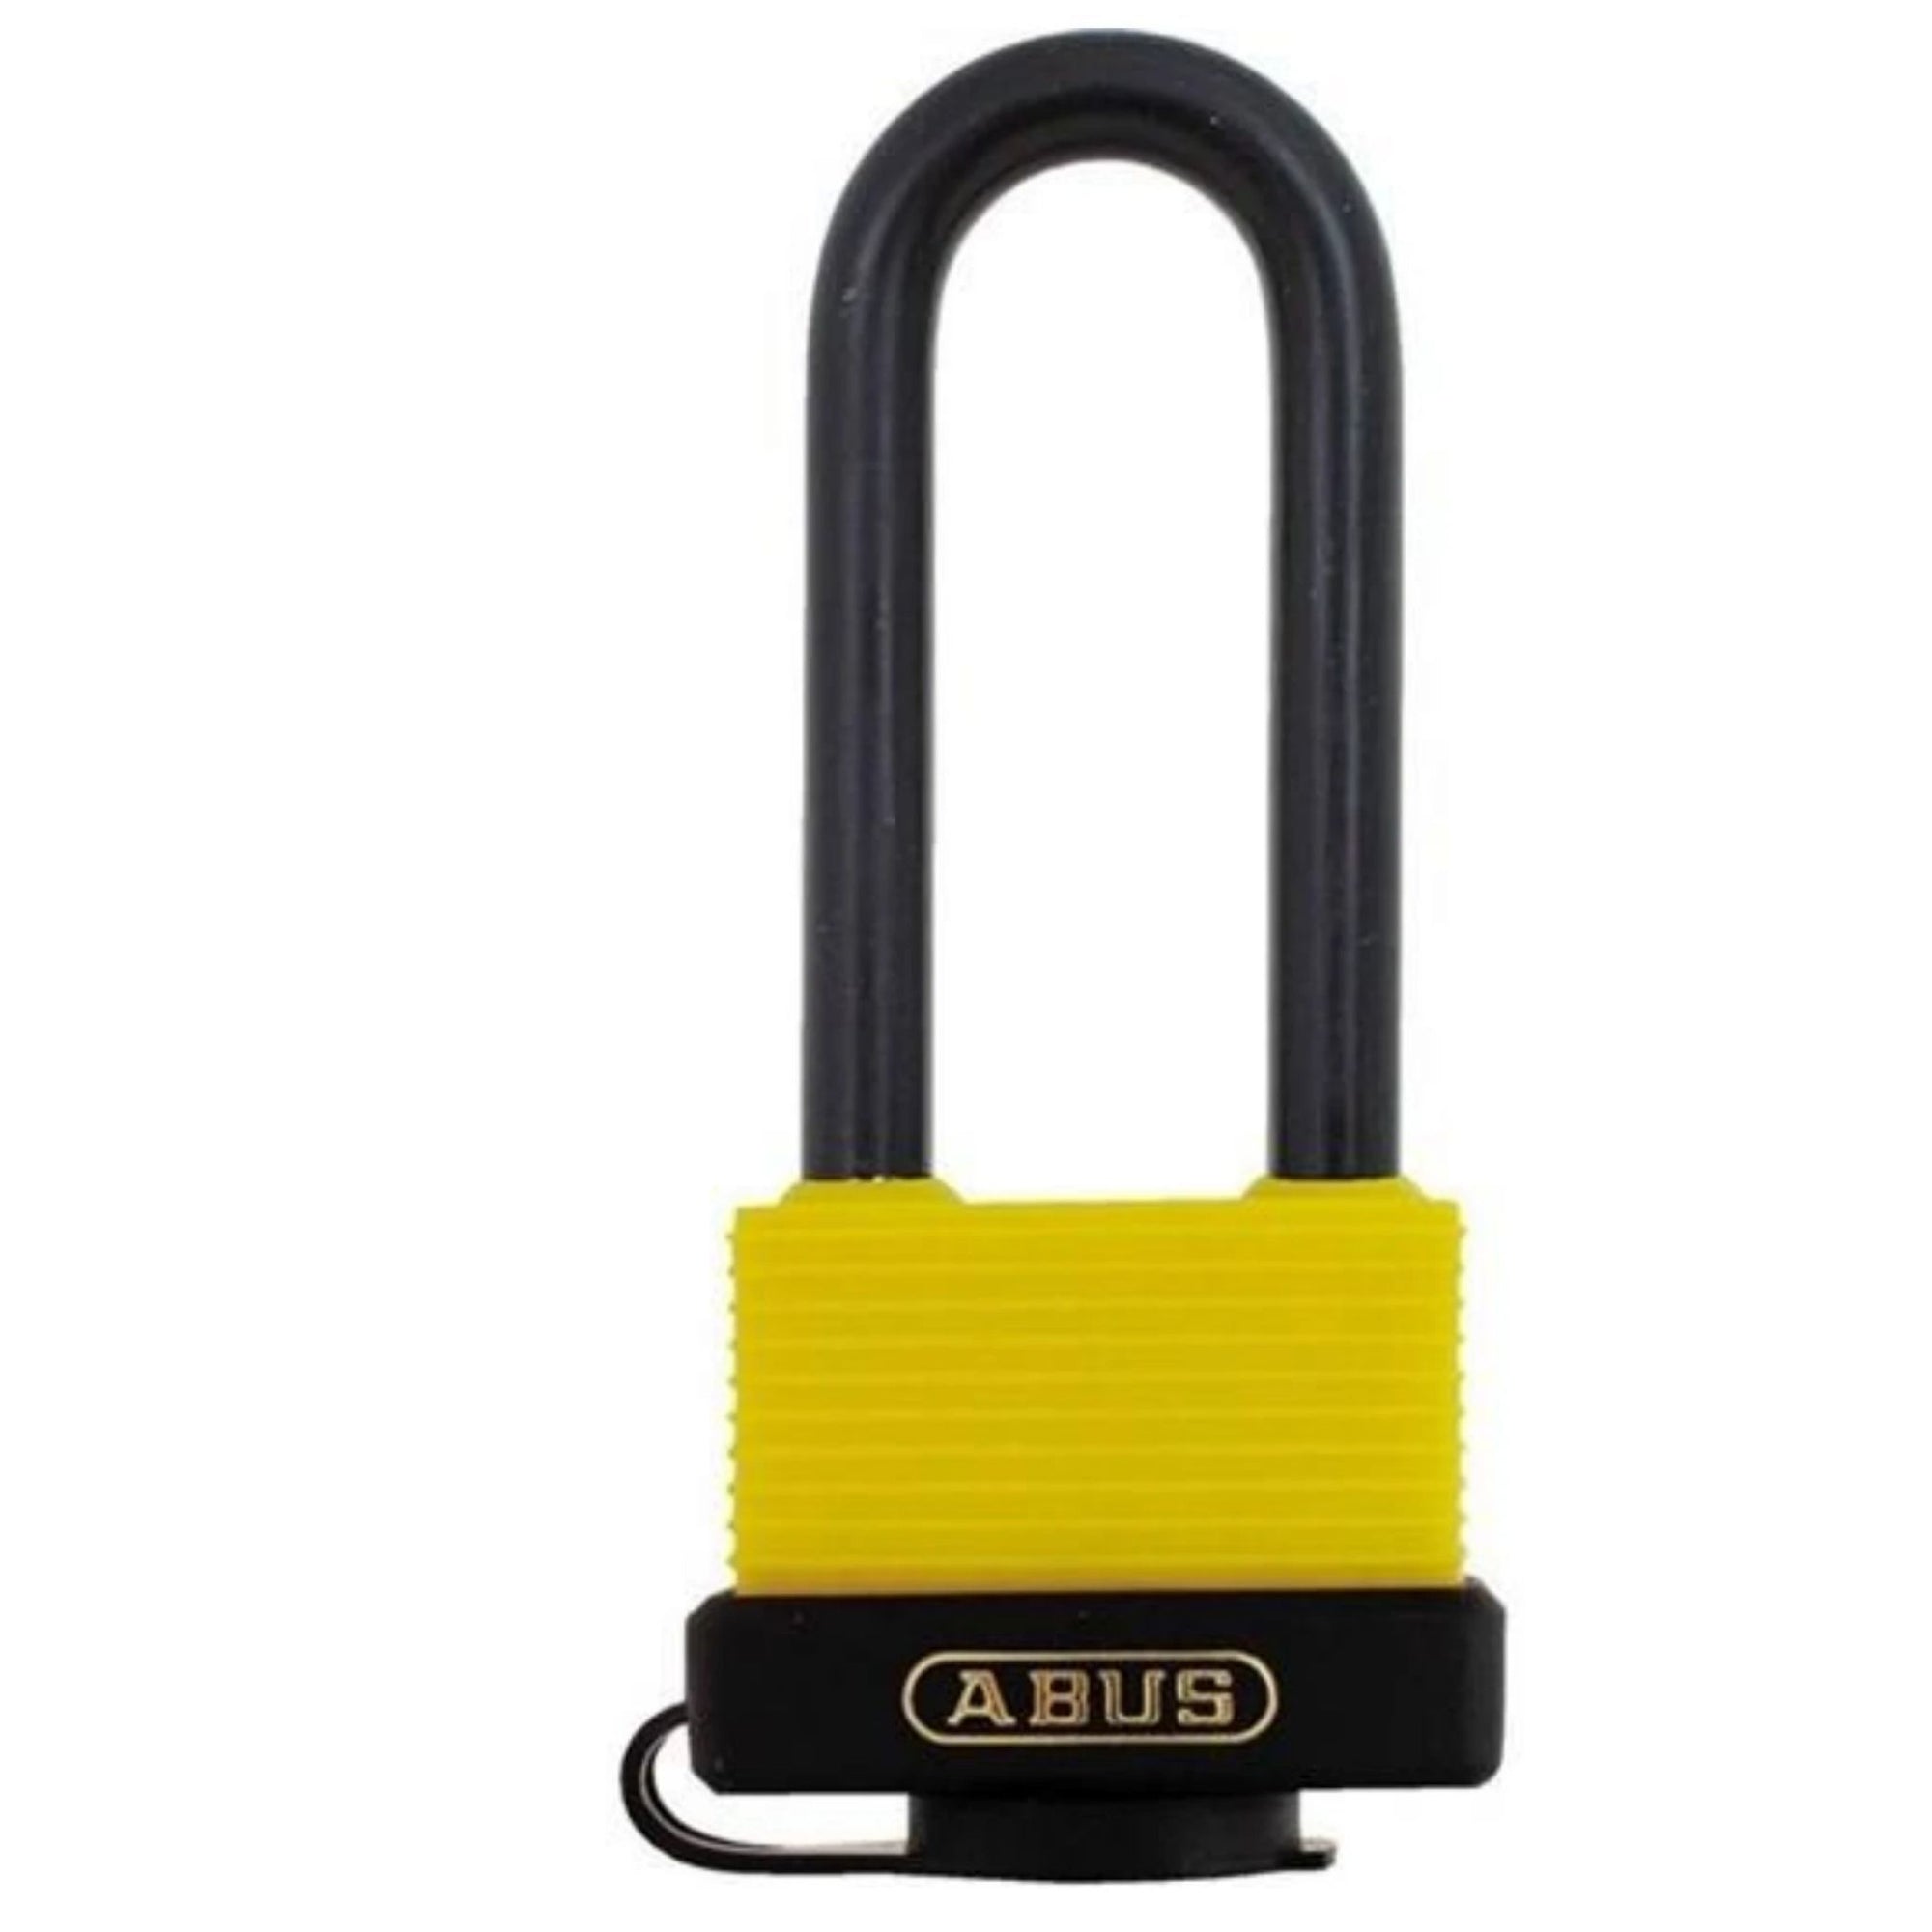 Abus 70/45HB63 KD Lock Keyed Different Weatherproof Brass Padlocks with 2.5-Inch Shackle - The Lock Source